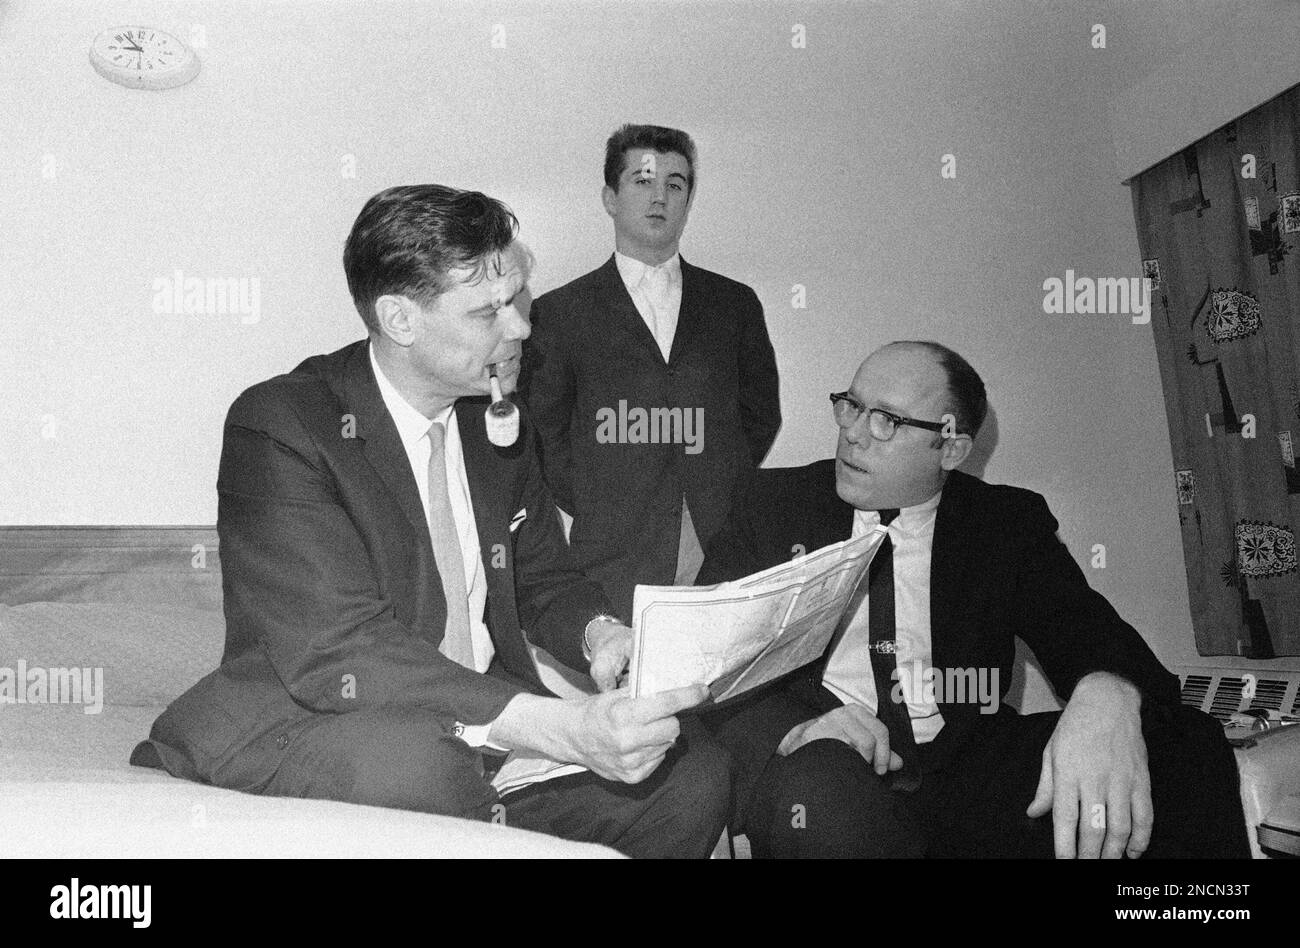 George Lincoln Rockwell, left, of Arlington, Va., and self-appointed “Fuehrer” of the American Nazi Party, discusses plans with his campaign manager Lynn Giesy, right, of Arlington, Va., in a hotel at Concord, New Hampshire, Jan. 25, 1964 for entering the New Hampshire presidential preference primary. Looking on is Storm Leader David Peterson of Minneapolis, Minn. (AP Photo) Stock Photo